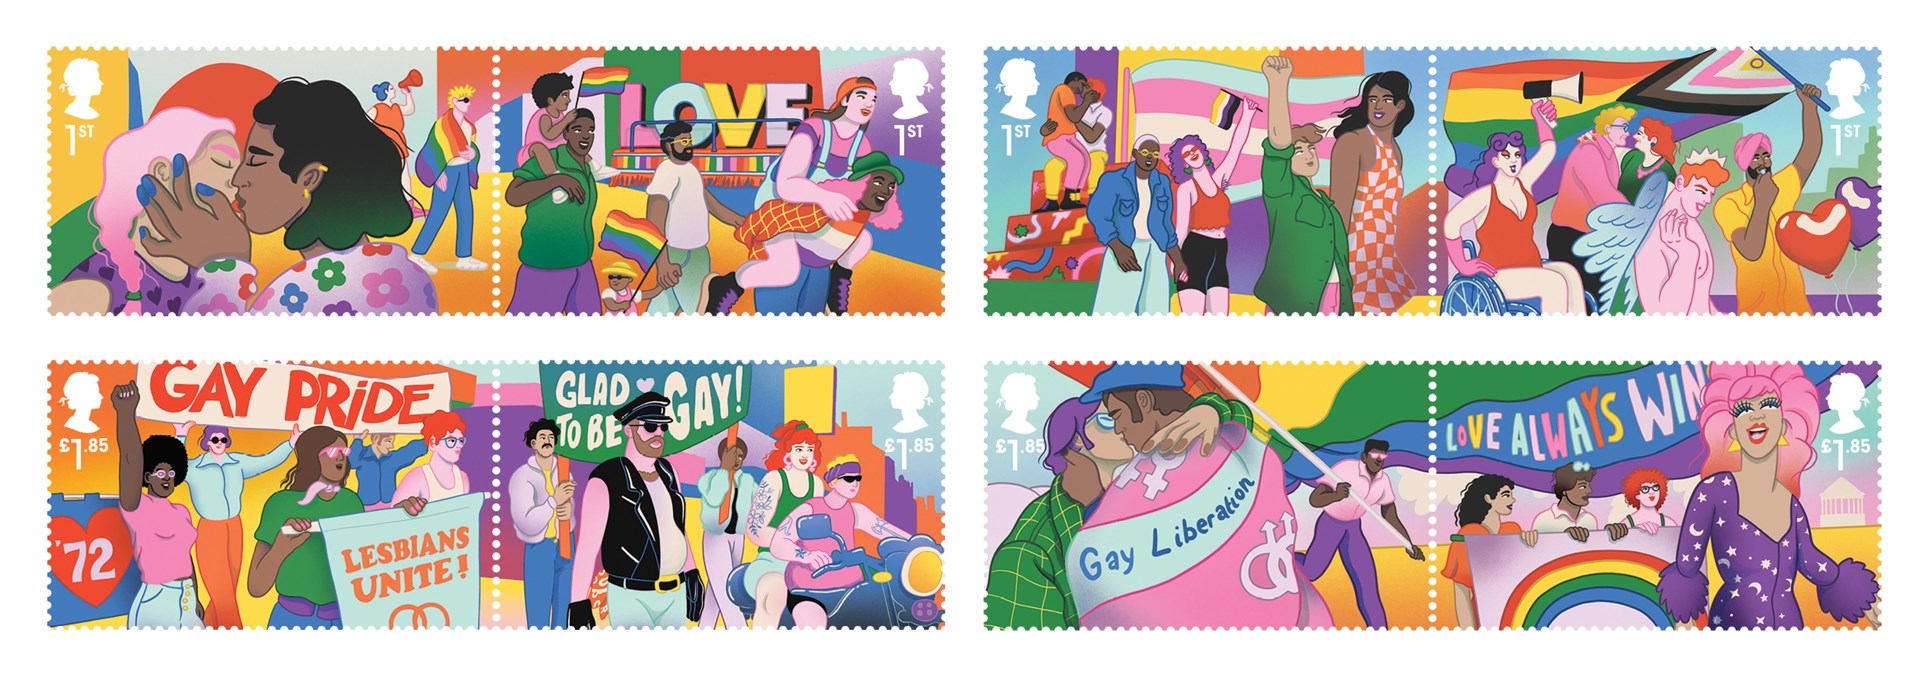 The set of eight new stamps being issued to mark the 50th anniversary of the UK’s first Pride rally (Royal Mail/PA)